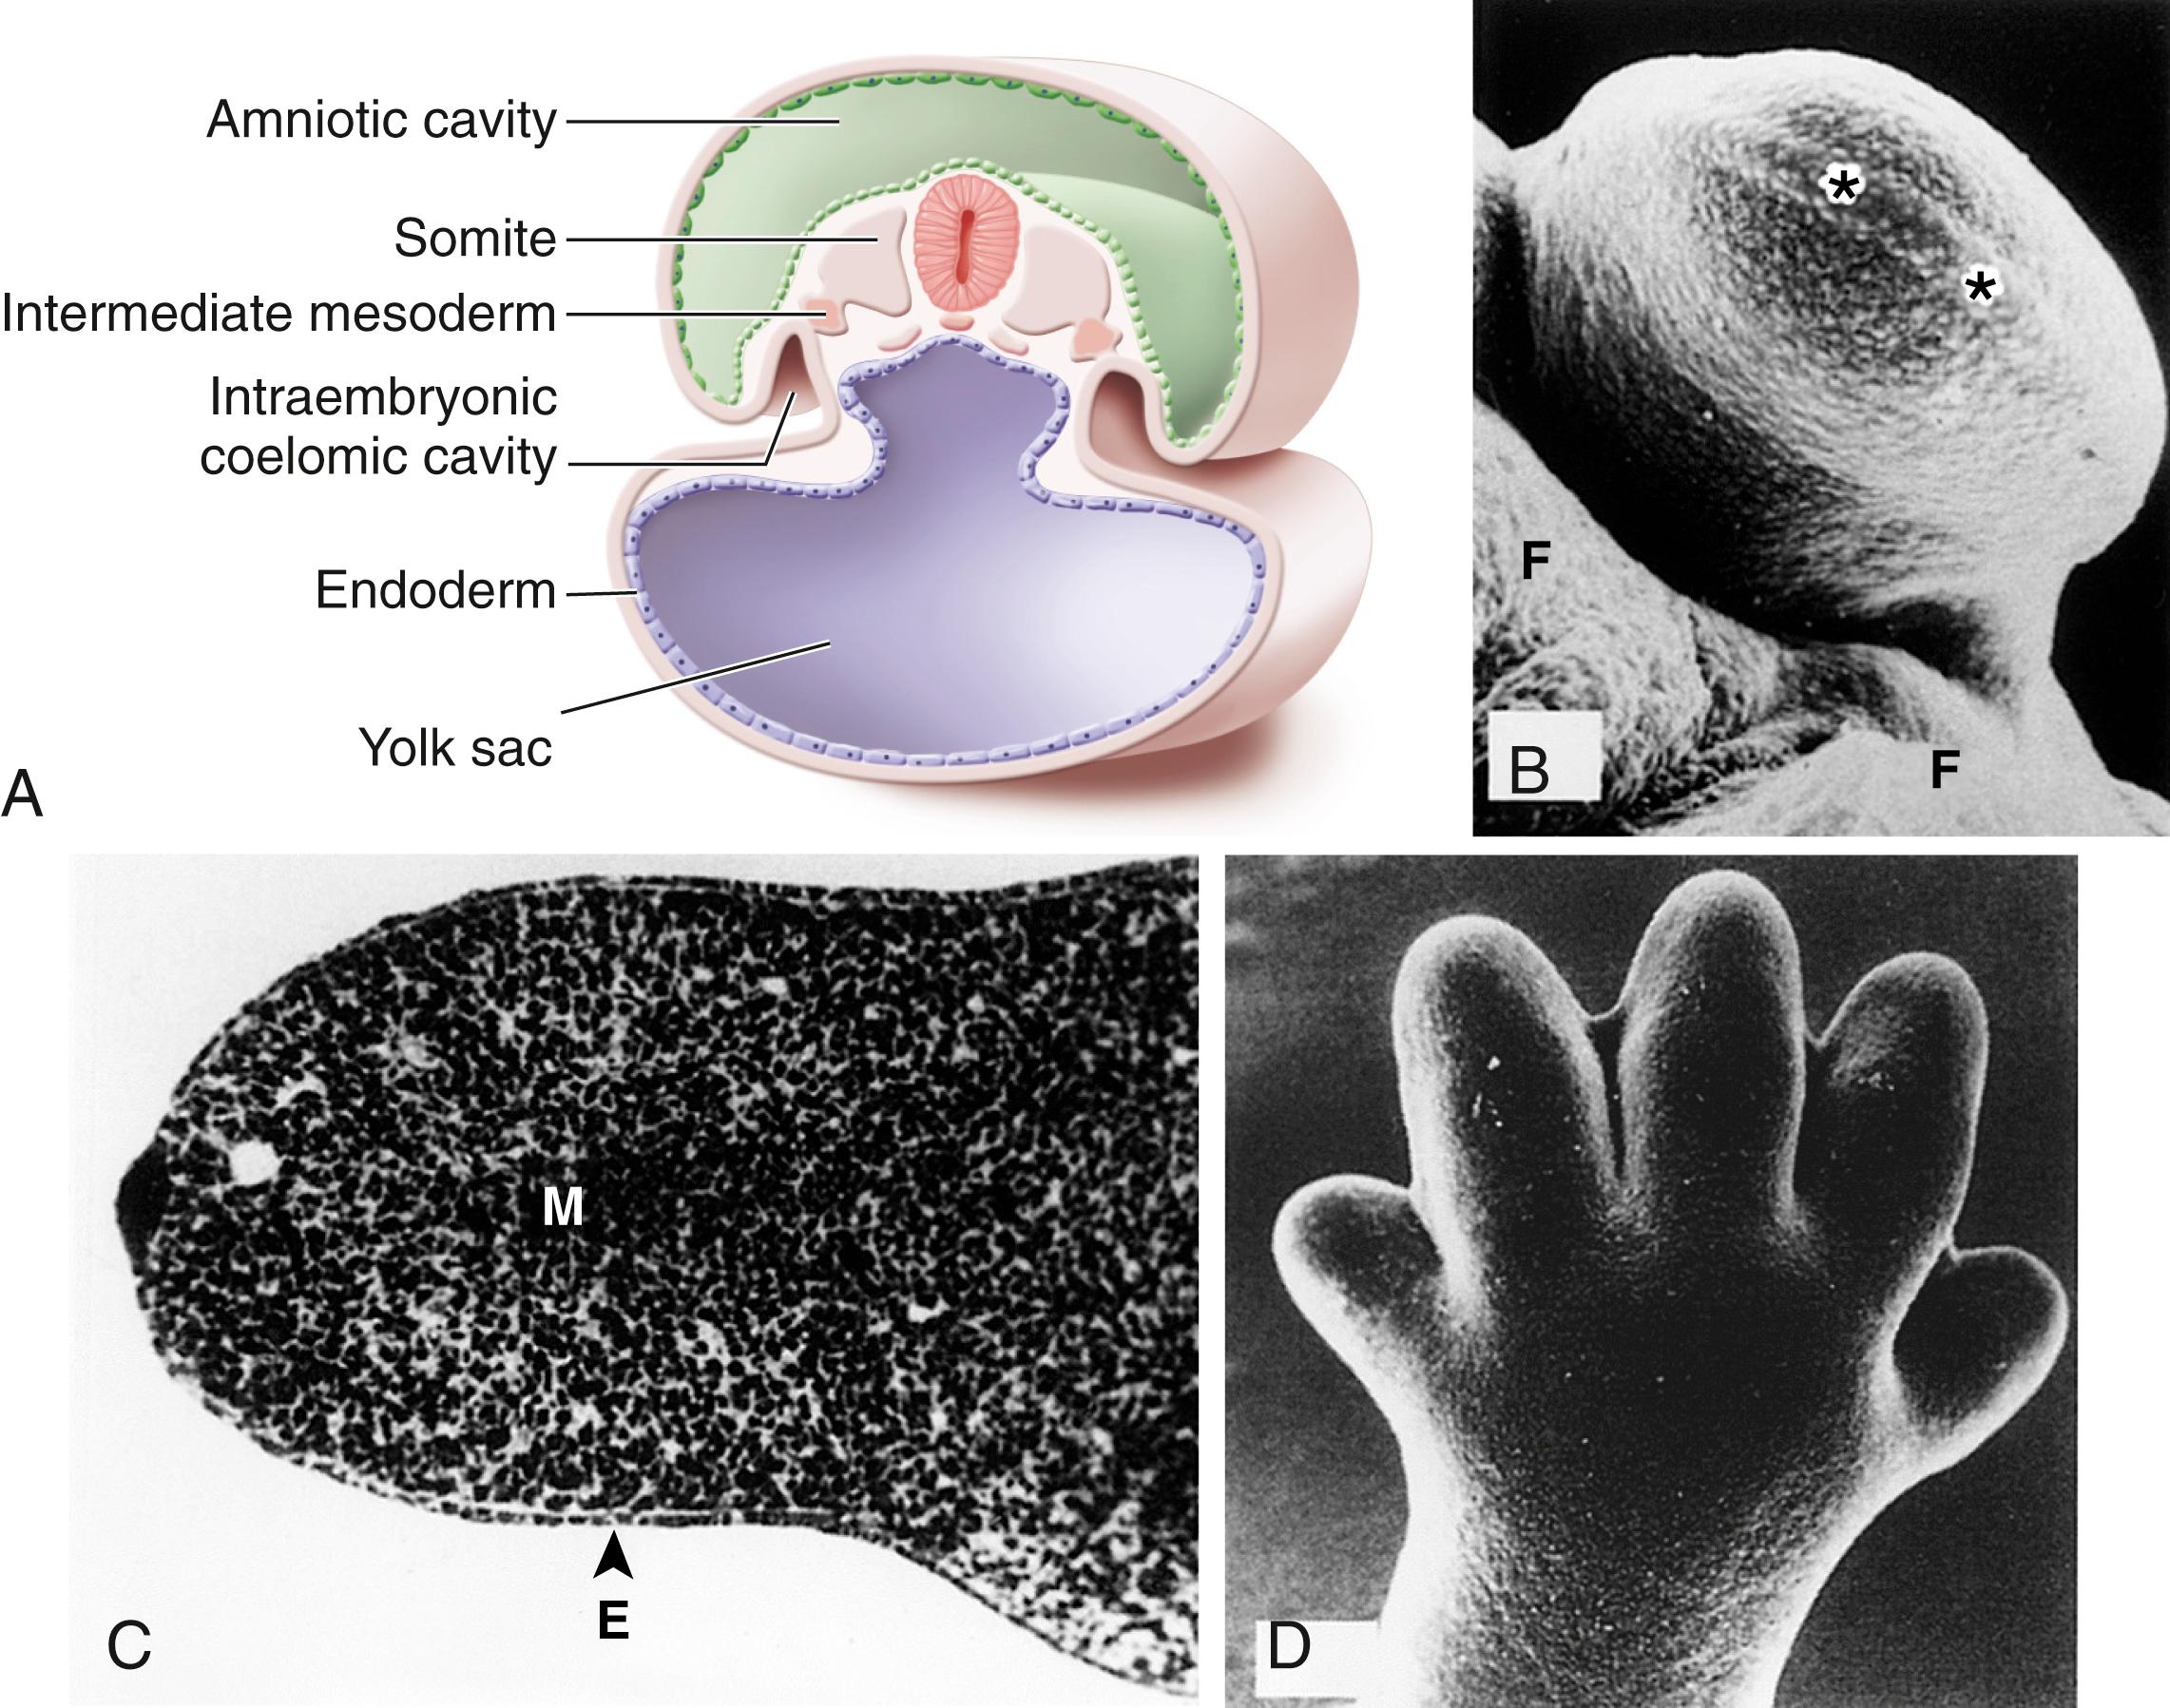 Fig. 21.2, Limb development. (A) Cross section through an embryo. The intermediate mesoderm signals the lateral plate mesoderm to initiate limb development. (B) The early limb bud. Asterisks indicate the location of the apical ectodermal ridge (AER), which regulates proximodistal growth of the limb bud. F, Flank. (C) Longitudinal section of the limb bud showing the ectoderm (E) surrounding a core of undifferentiated mesoderm (M) . (D) Digits are forming following programmed cell death in the AER in the spaces between the digits. Each digit then continues to grow under the influence of its own AER. More tissue between the digits will be removed by programmed cell death.